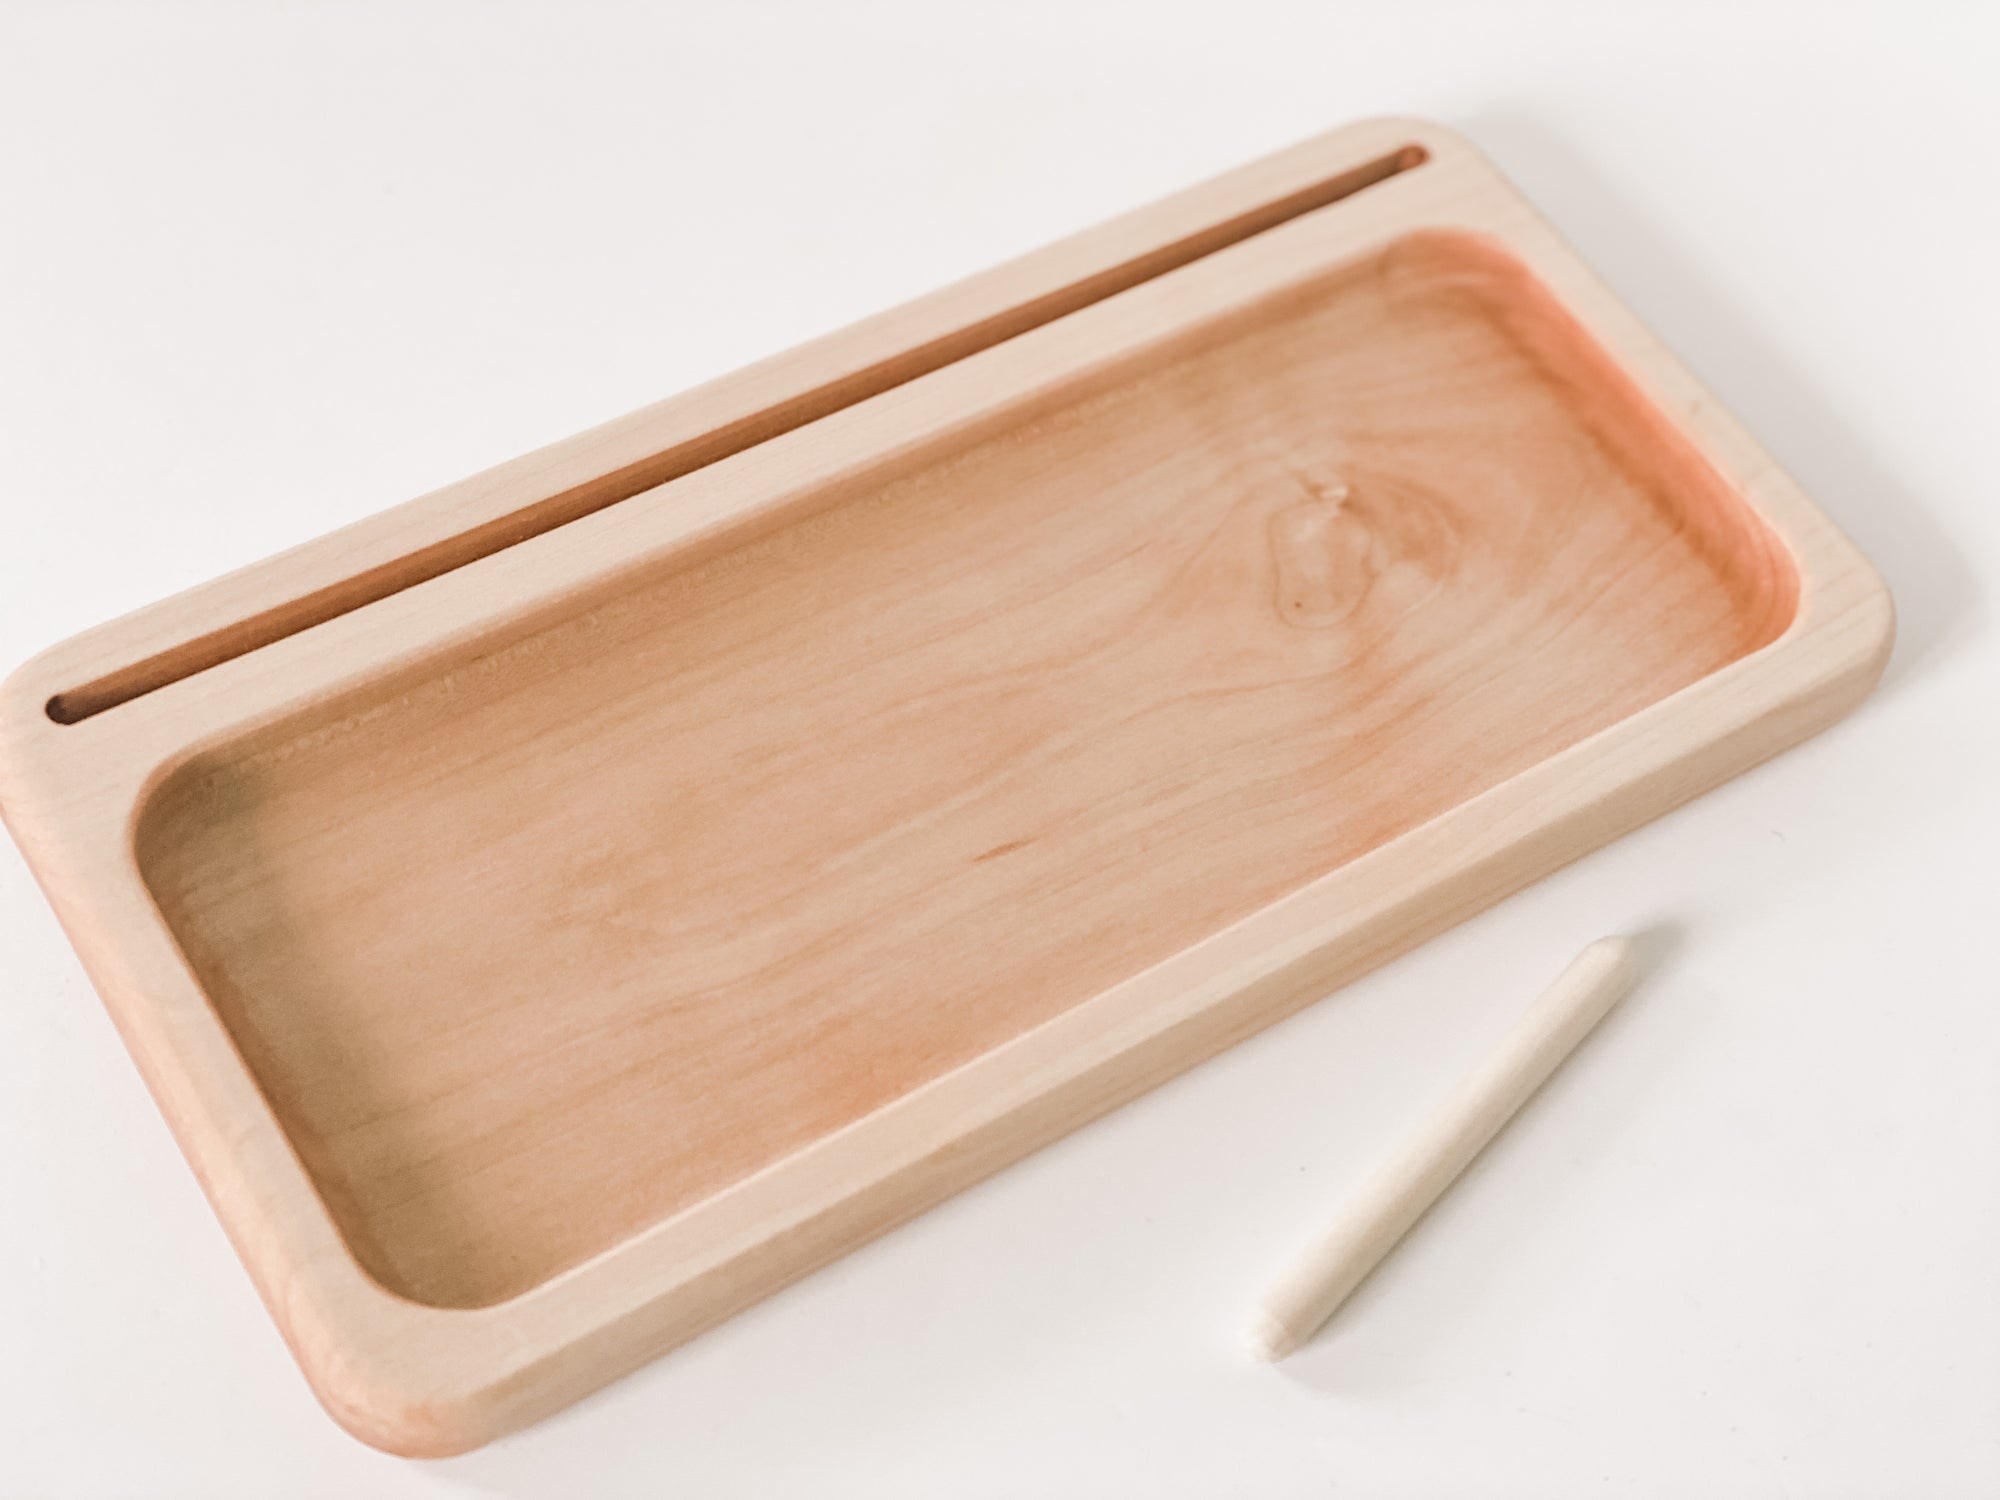 SG STOCK] Montessori Wooden Tray, Kids early learning, Children Tray with  Handles